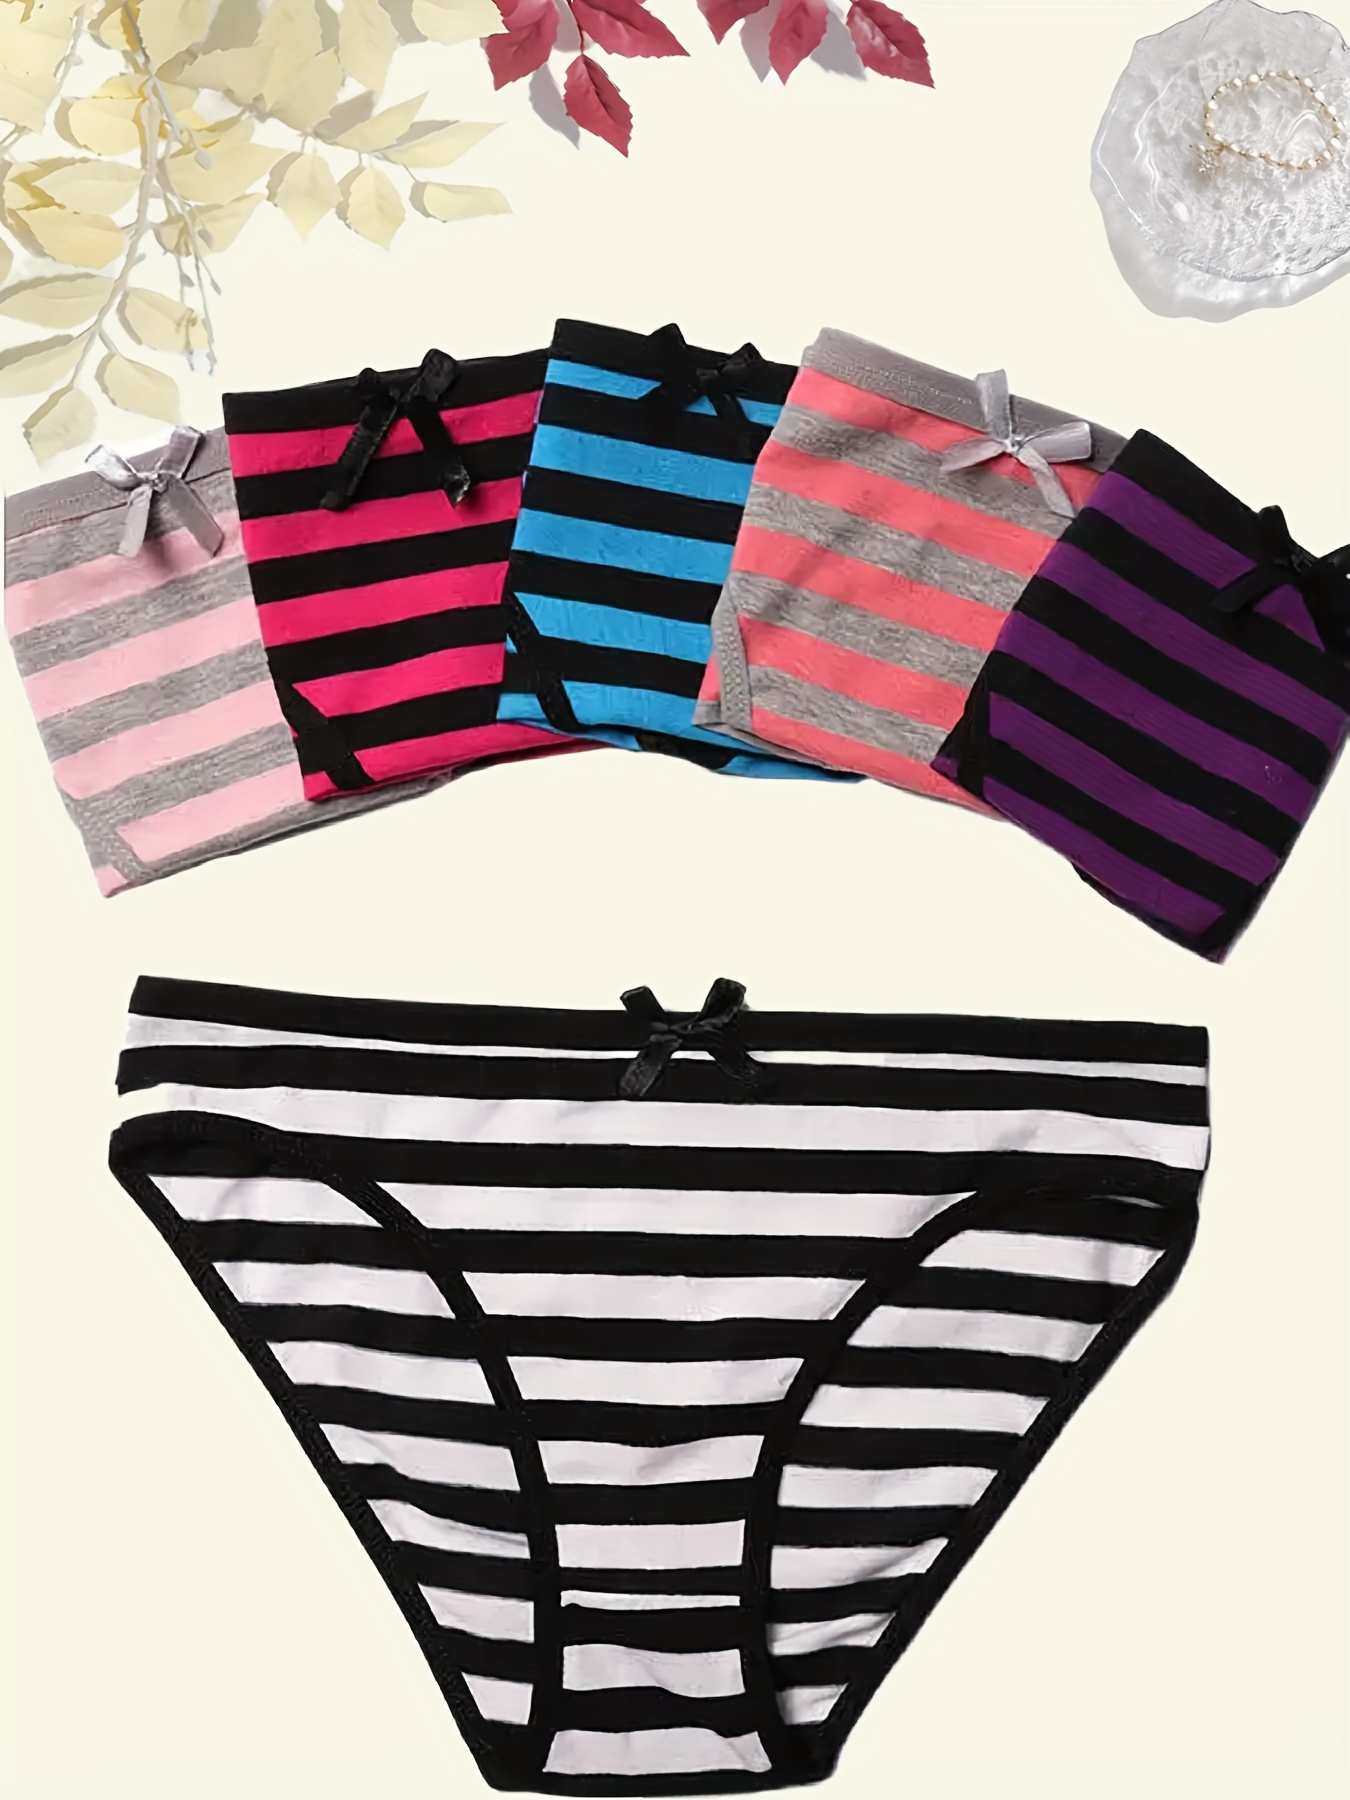 6pcs Striped Bow Tie Briefs, Comfy & Breathable Stretchy Intimates Panties,  Women's Lingerie & Underwear